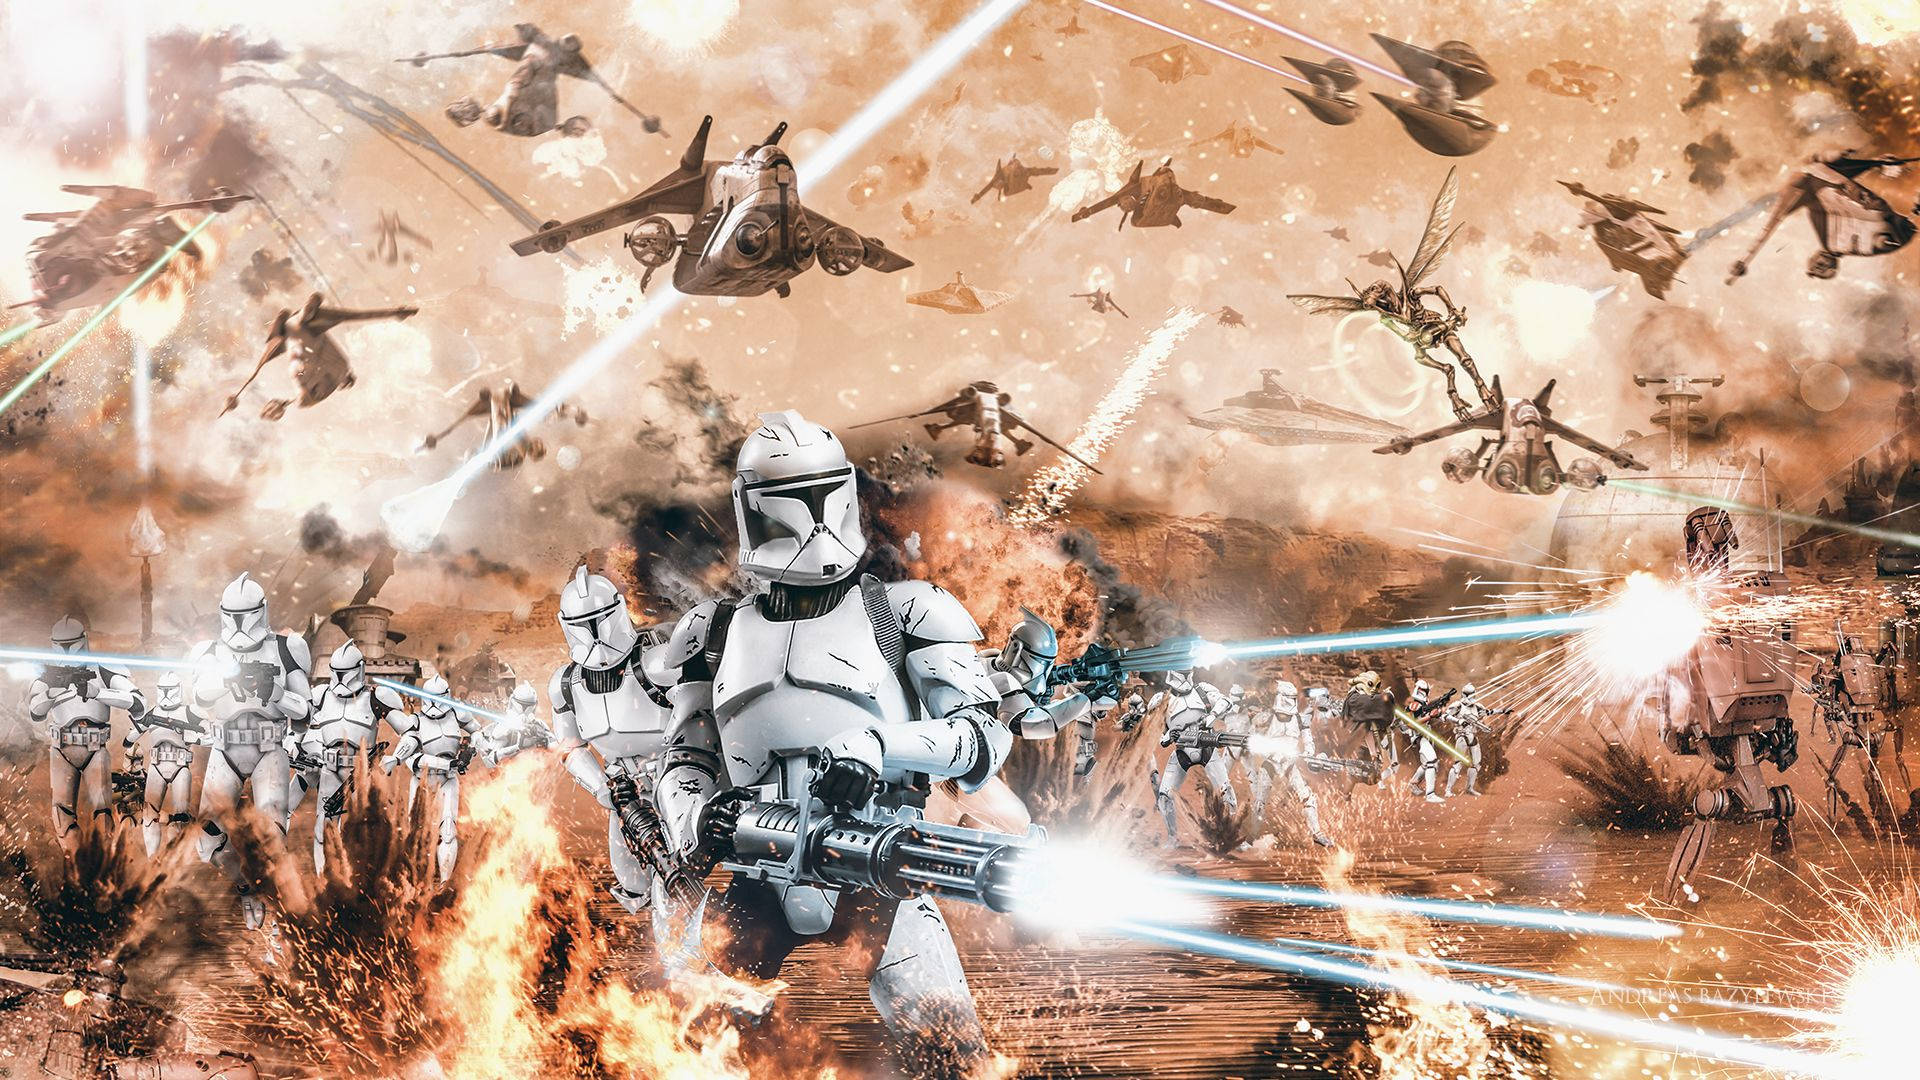 Image  Clone Troopers Lead Attack In Severed Star Wars Battle Wallpaper